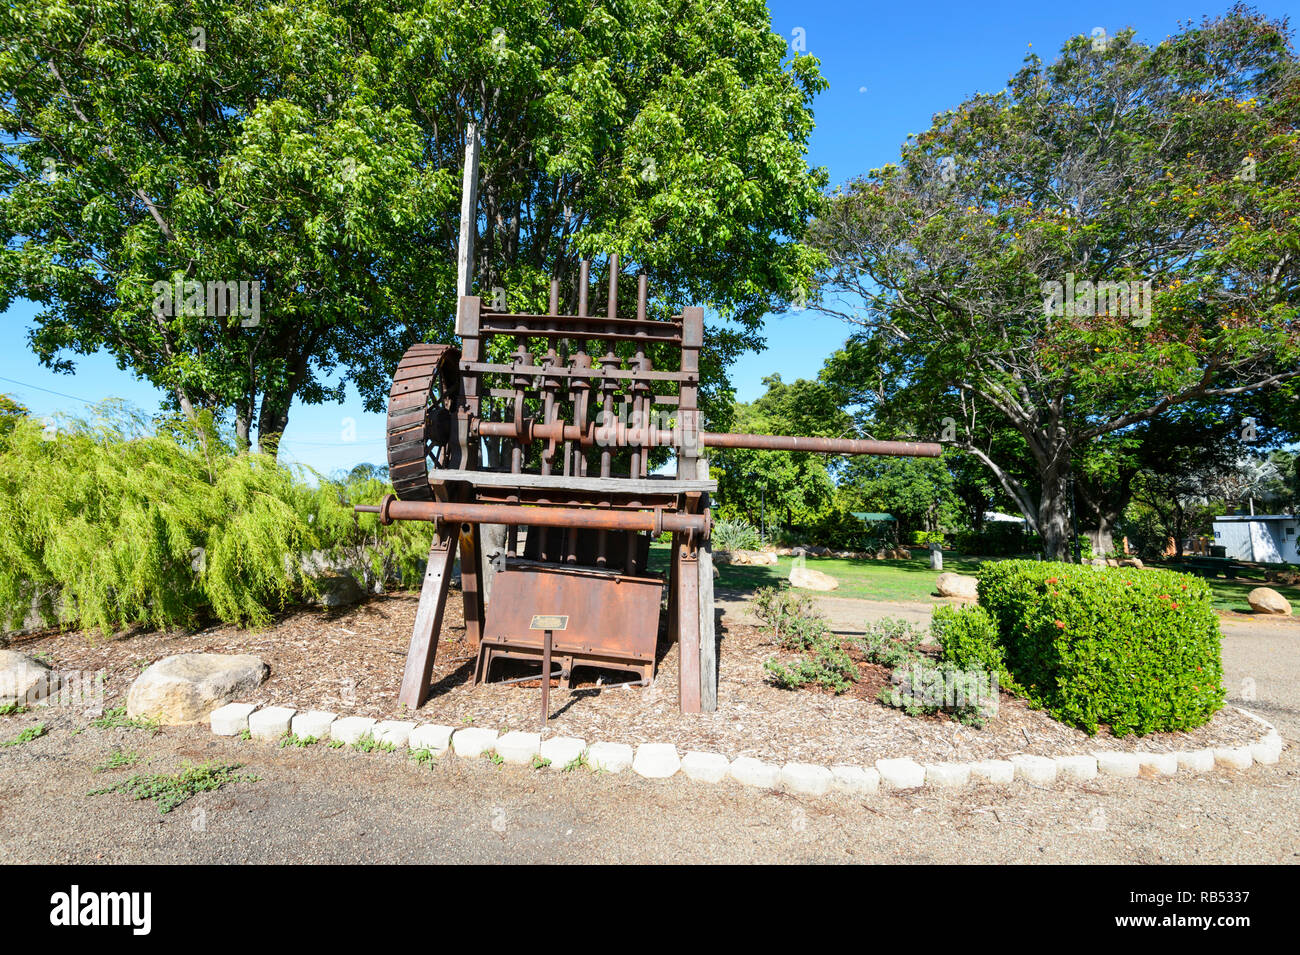 Stampers are the remains of a gold battery in Georgetown, a small rural town along the Savannah Way, Queensland, QLD, Australia Stock Photo